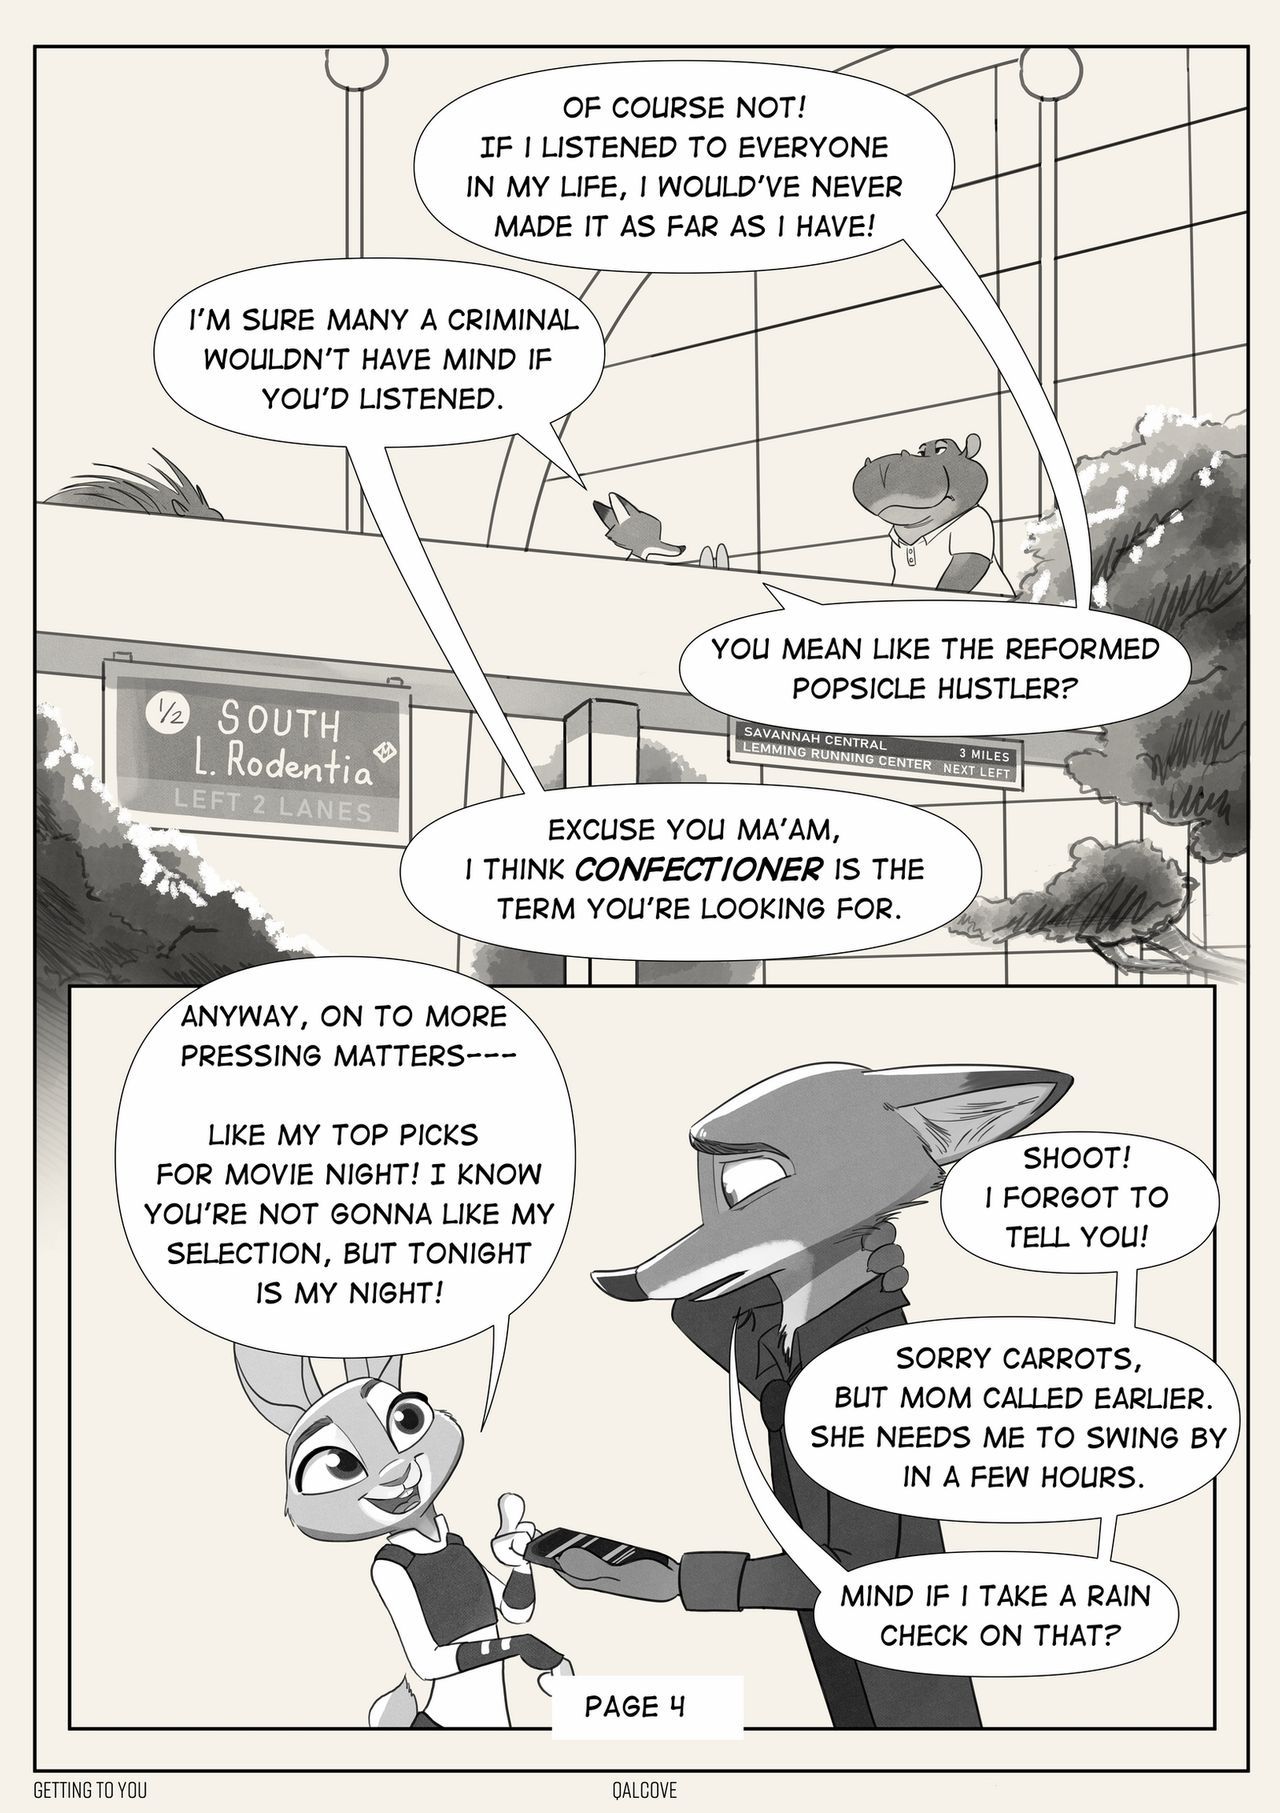 [Qalcove] Getting To You (Zootopia) Ongoing 4